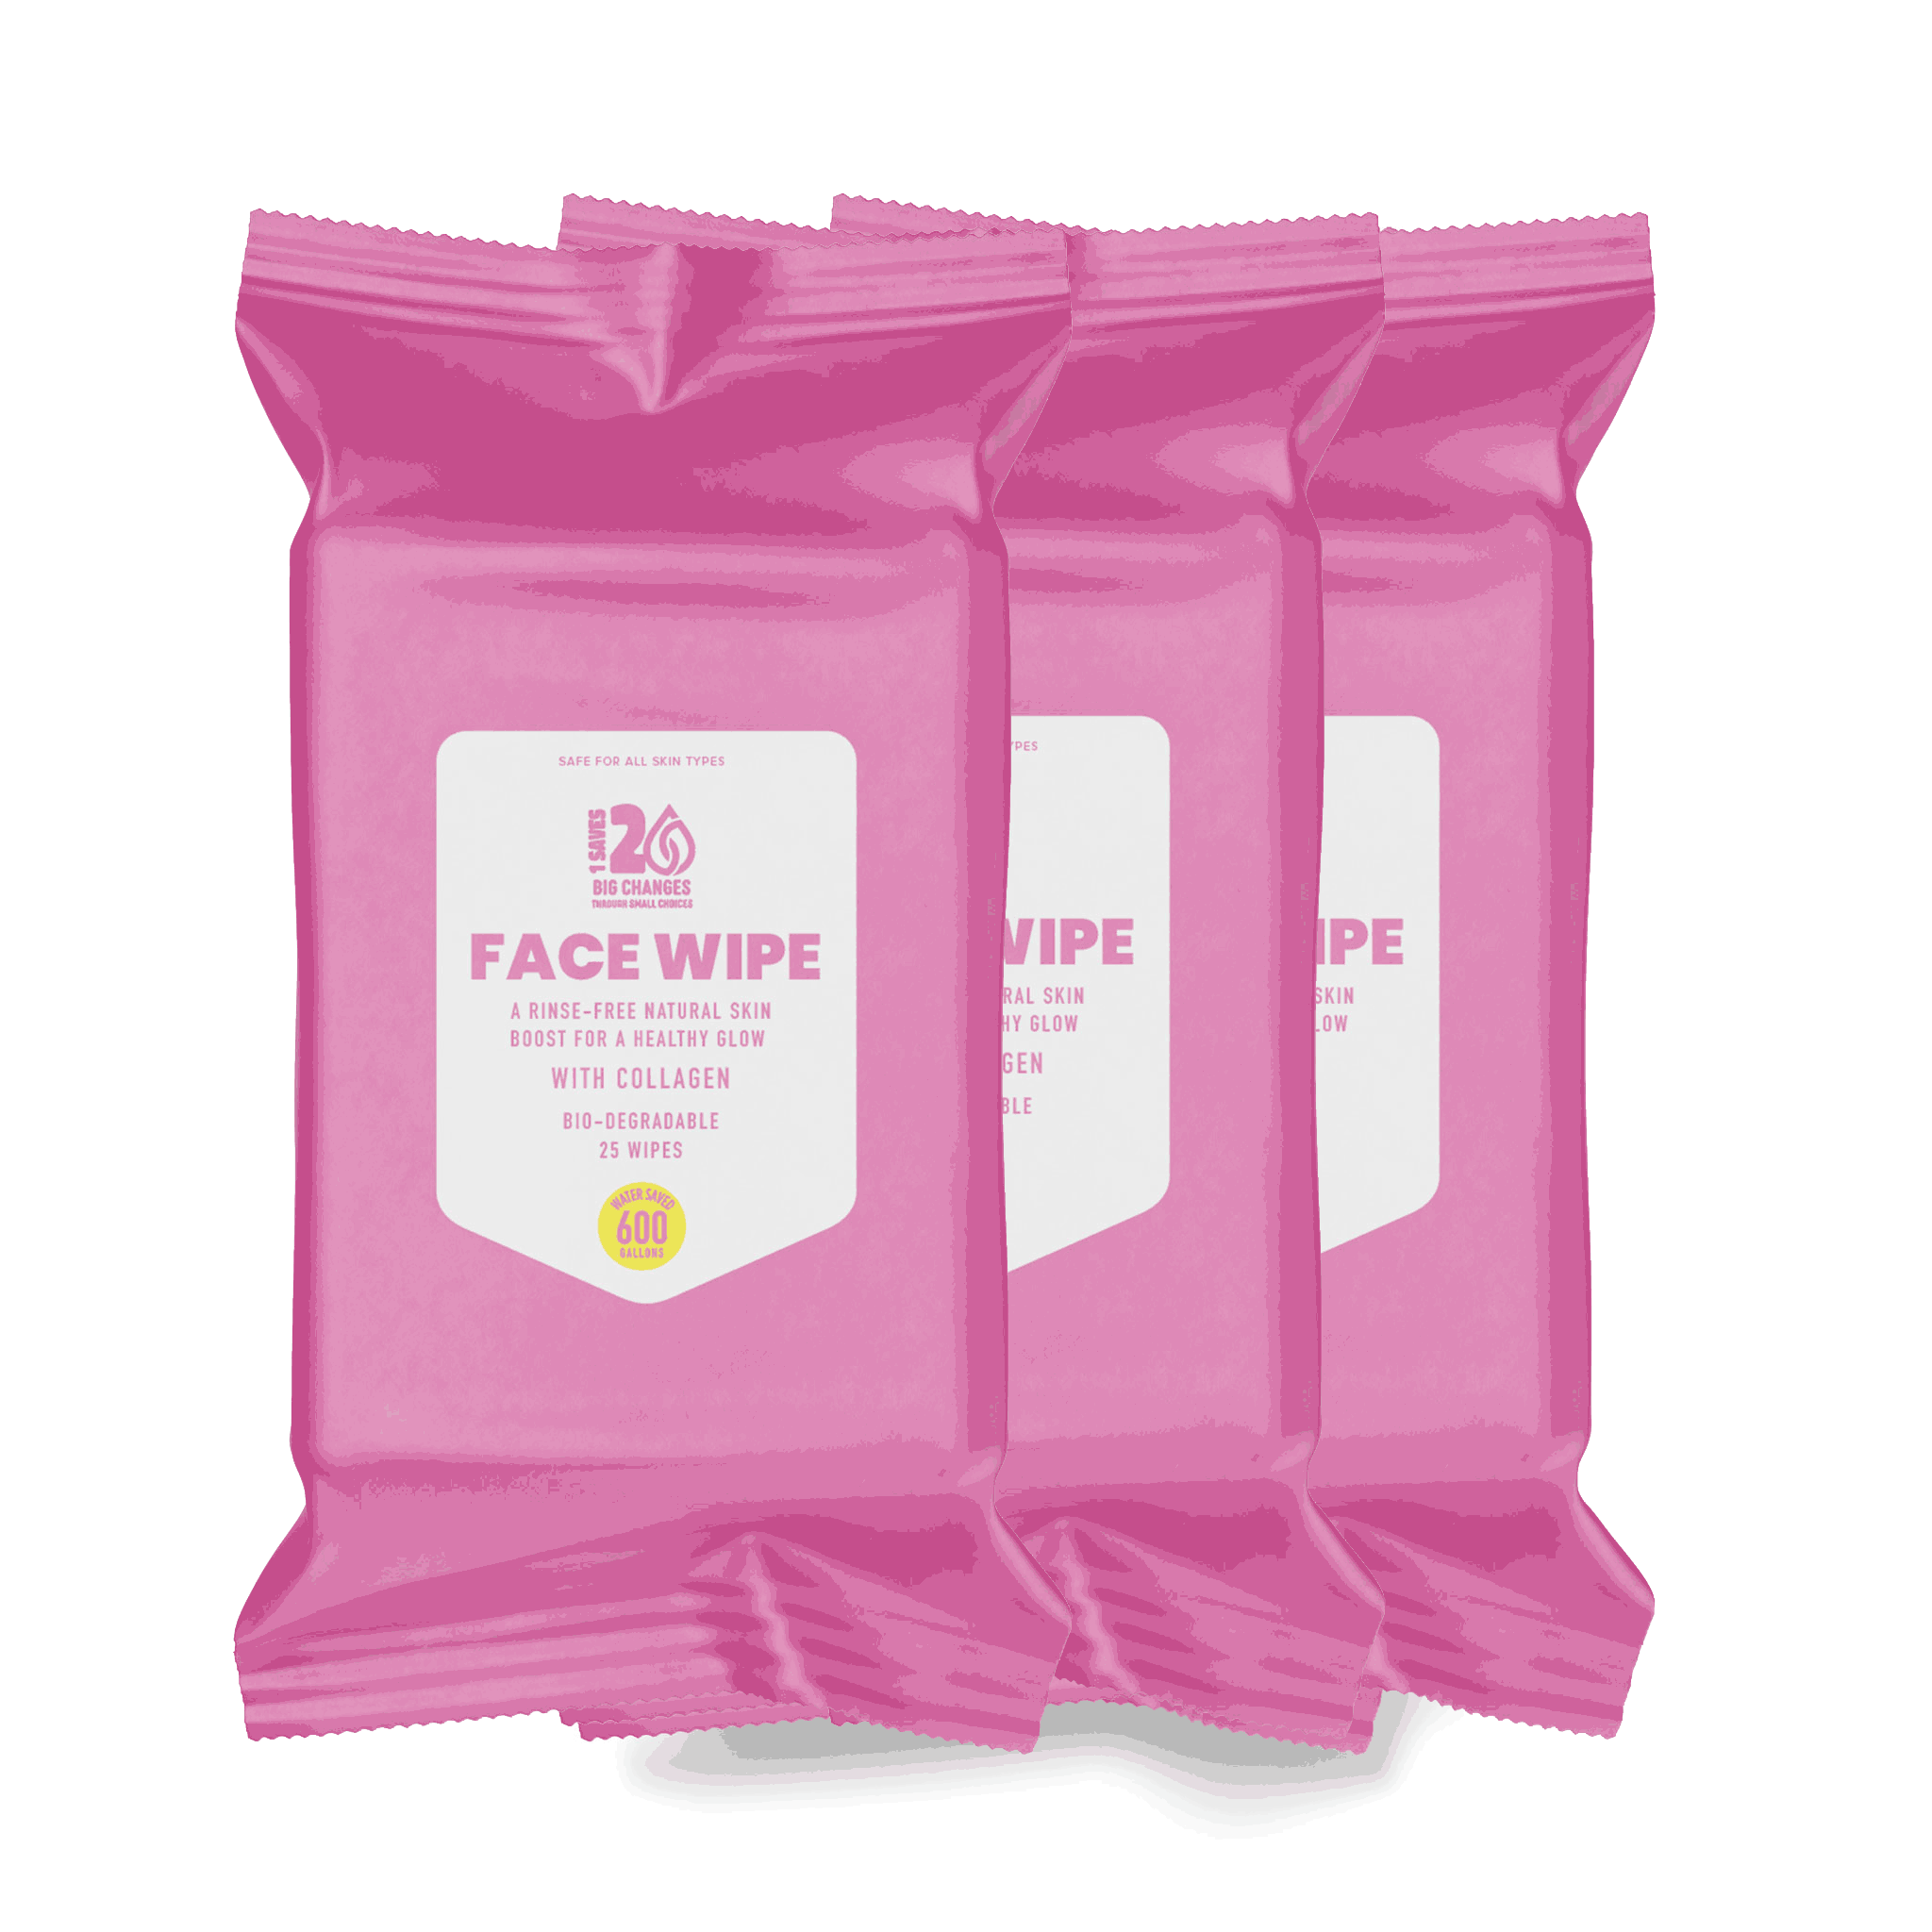 Face Wipes (3 pack)